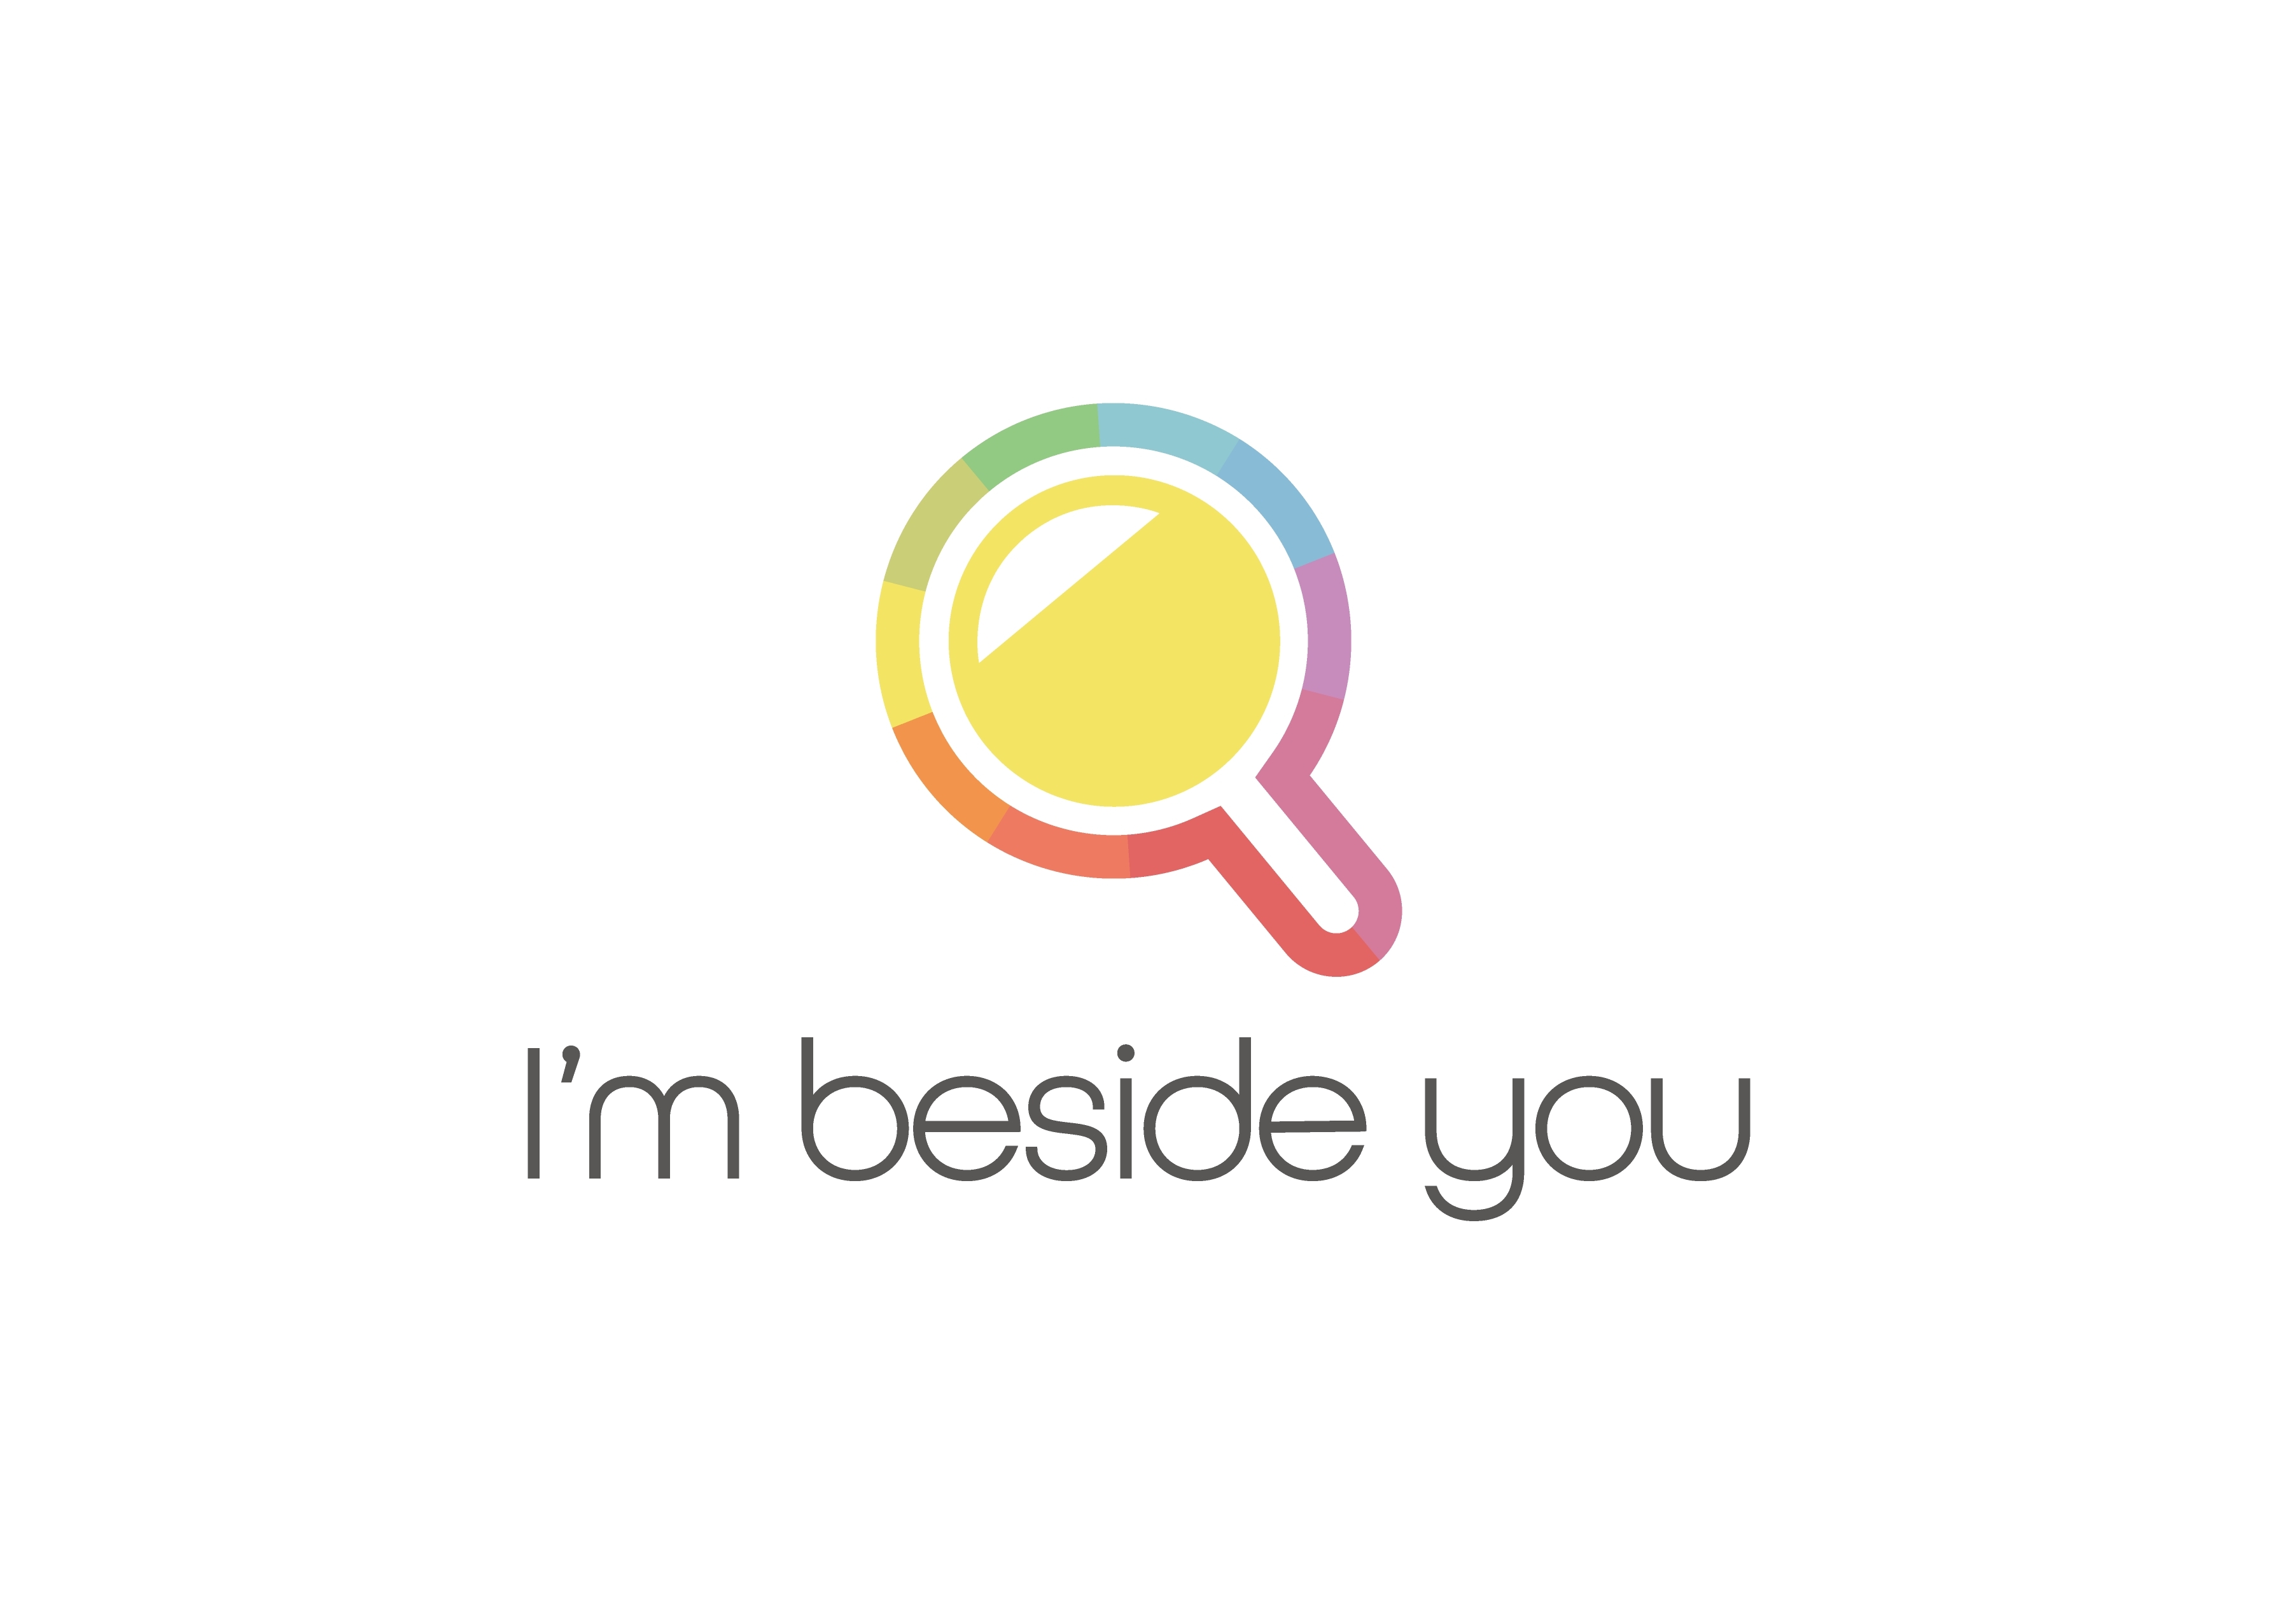 I'mbesideyou Inc. Launched “UNION OF EMOTIONS” Service Using AI to Visualize Cheering Each Other Across National Borders | Business Wire